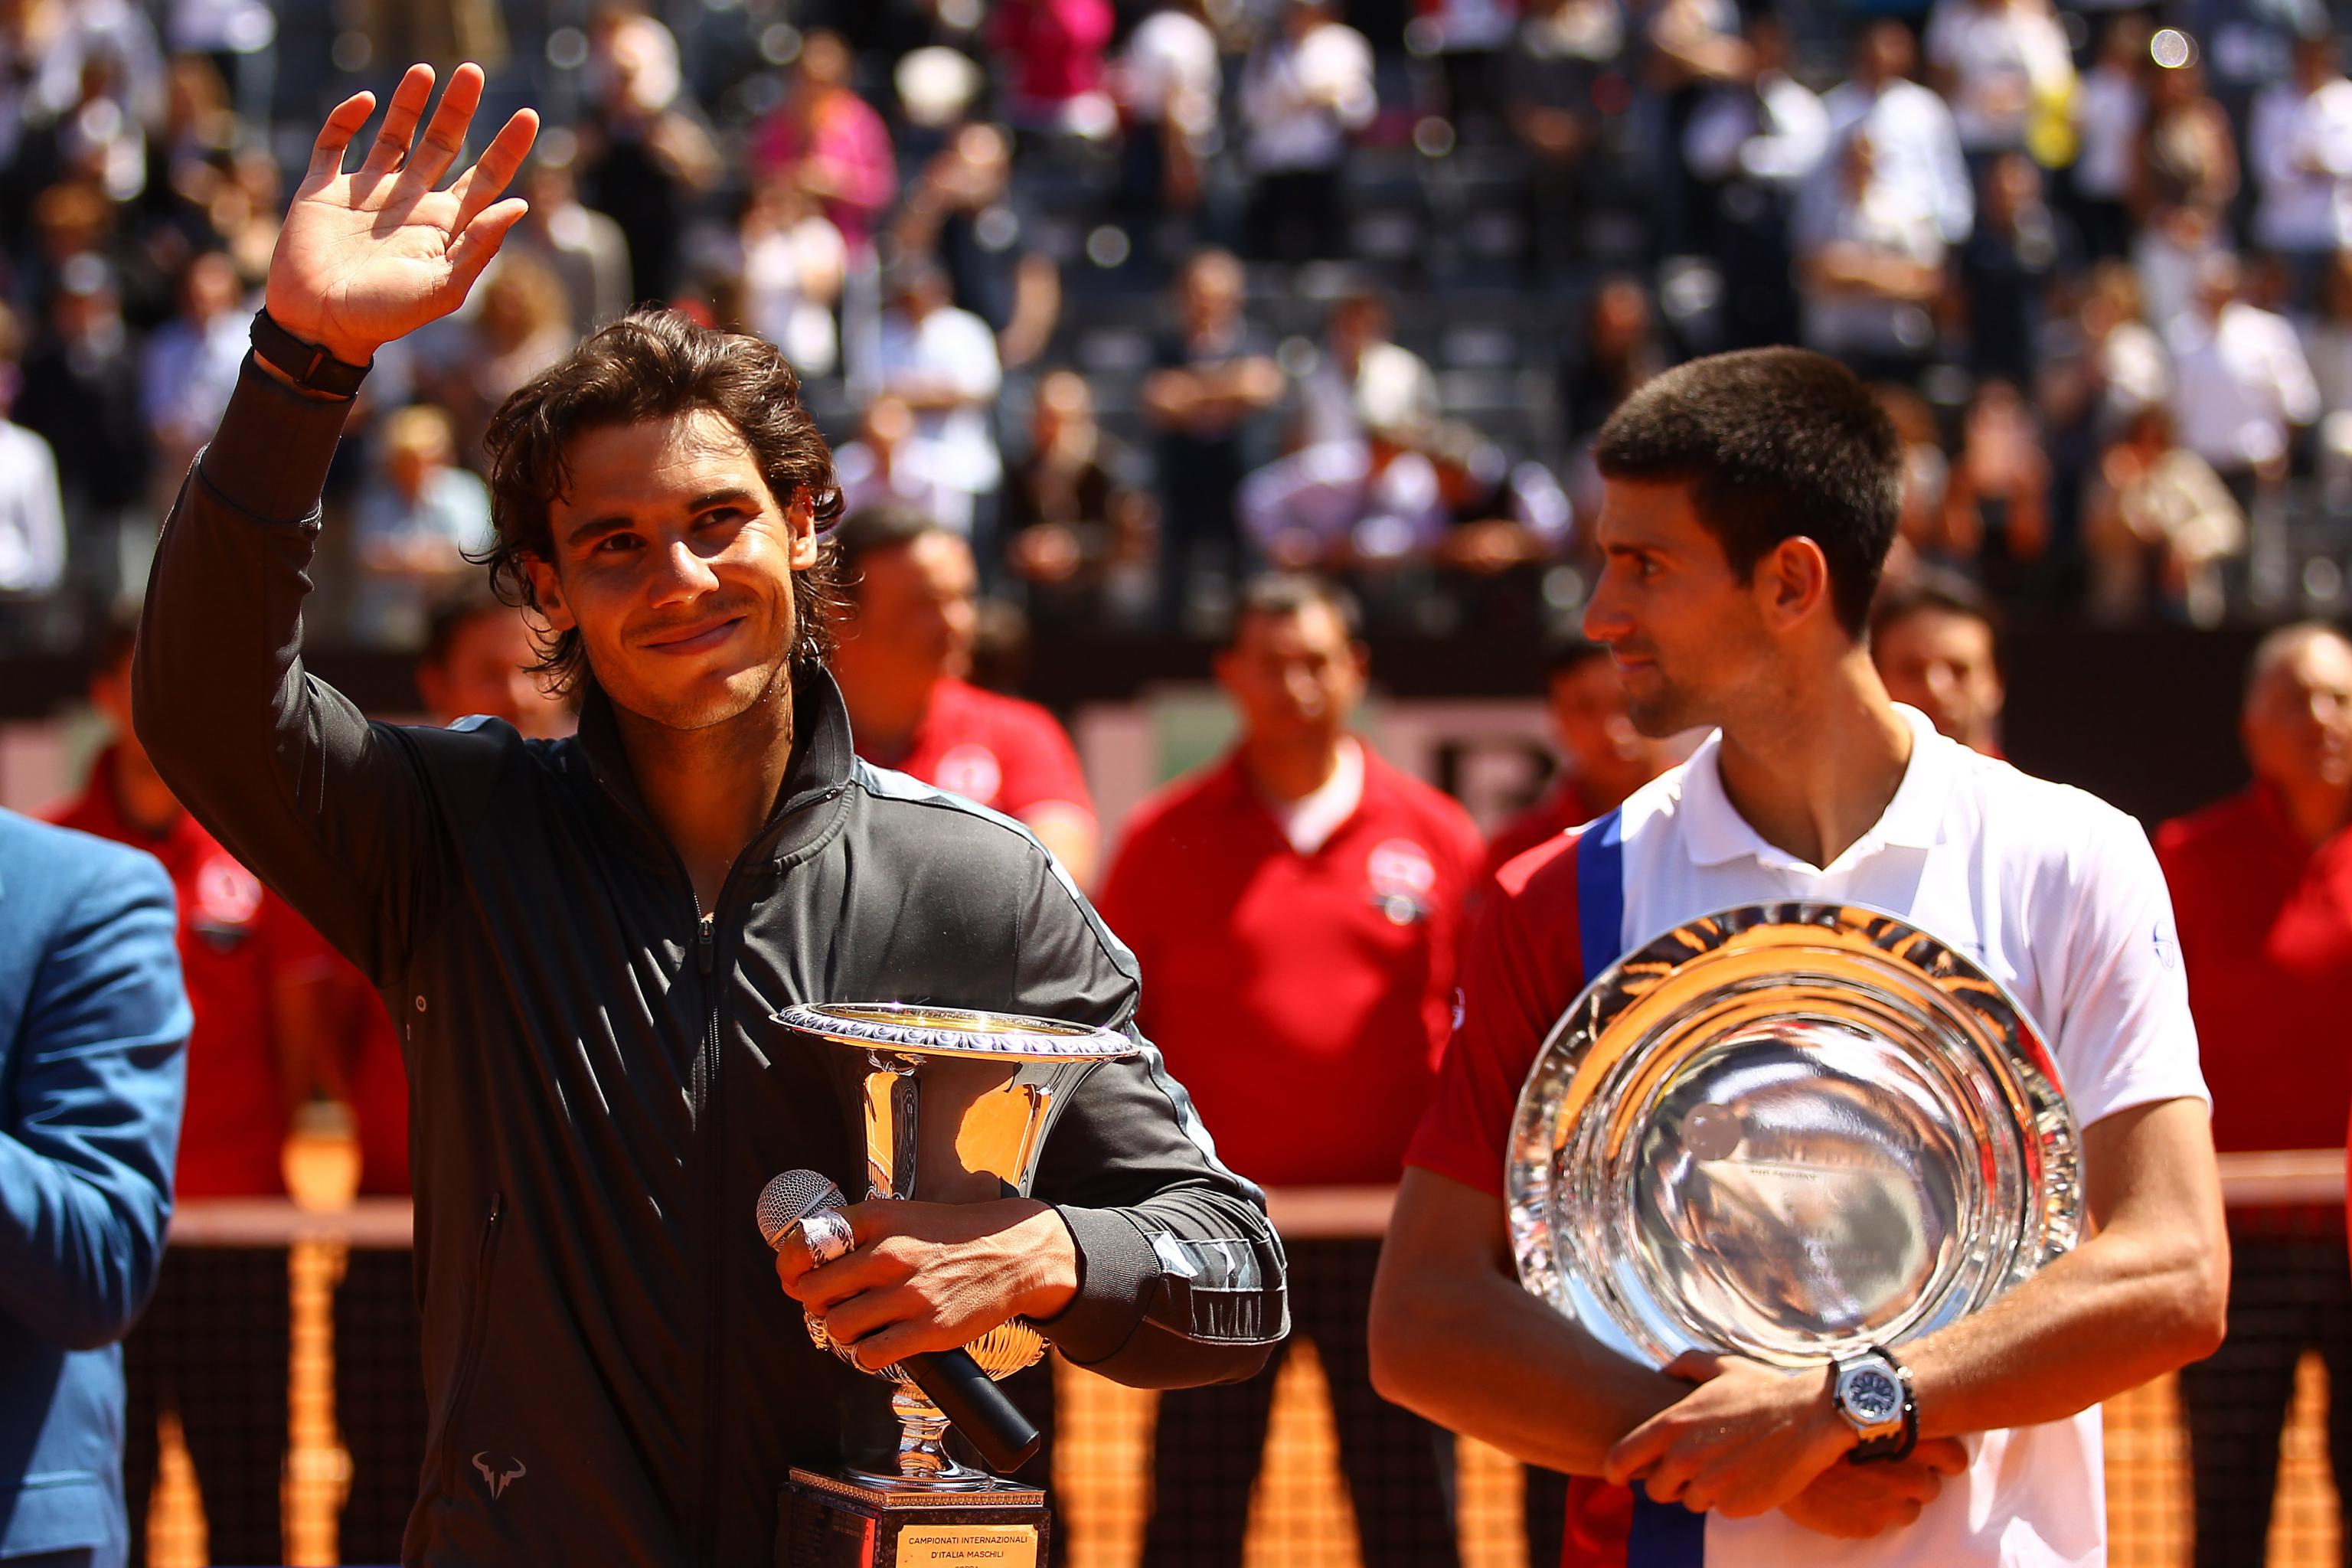 Rome Masters draw is out! – Rafael Nadal Fans